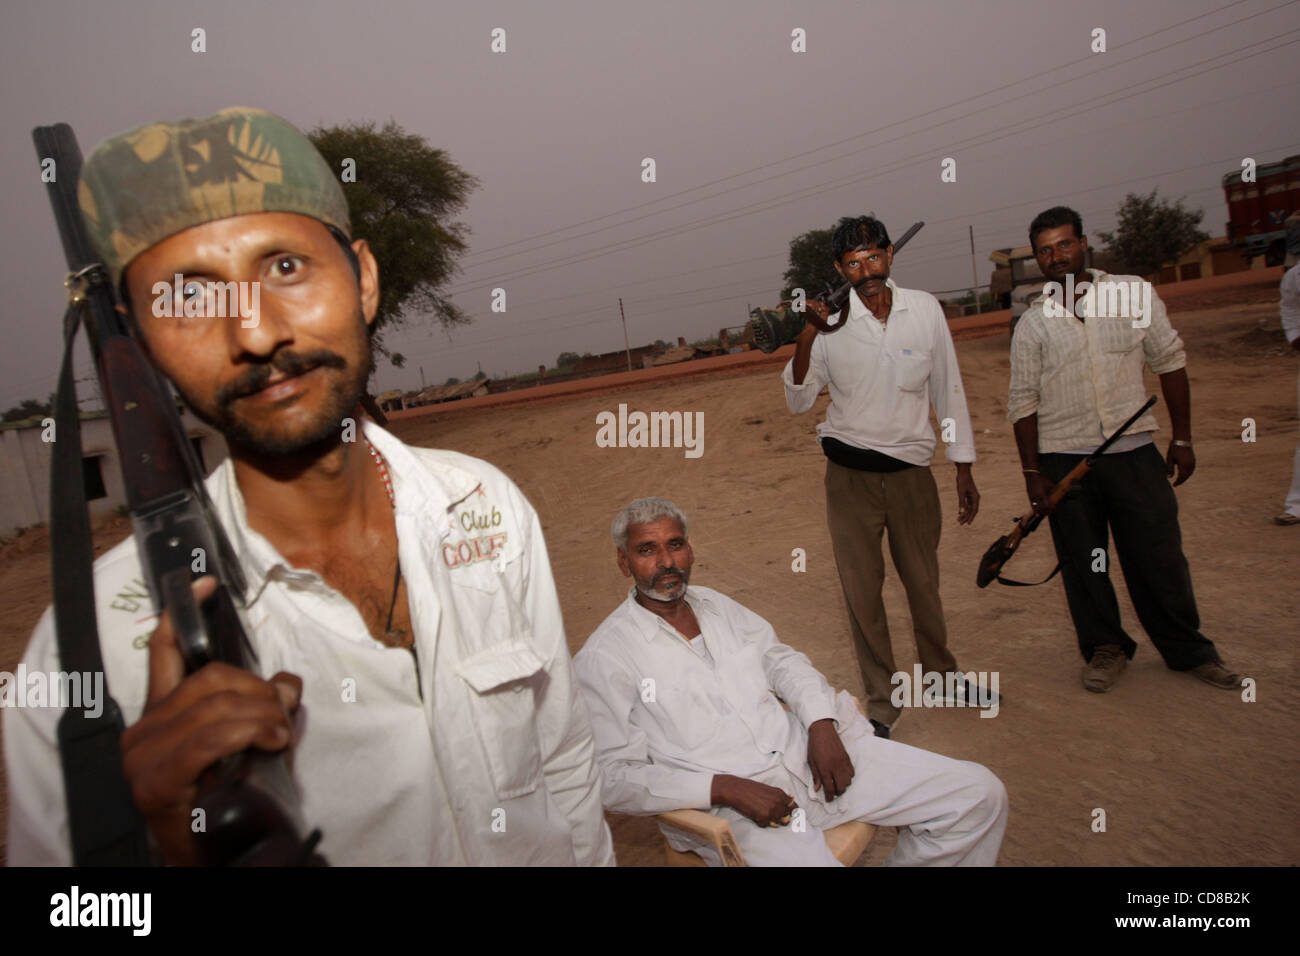 Oct 14, 2008 - Sheikpur Gowah, Uttar Pradesh, India - MAN SINGH, center, who operated as a dacoit with bandit queen late Phoolan Devi. Their gang they killed 21 men in a nearby village in 1981 in retribution for the rape of Phoolan Devi, and the killing of her boyfriend Vikram Mallah. Singh and Phoo Stock Photo